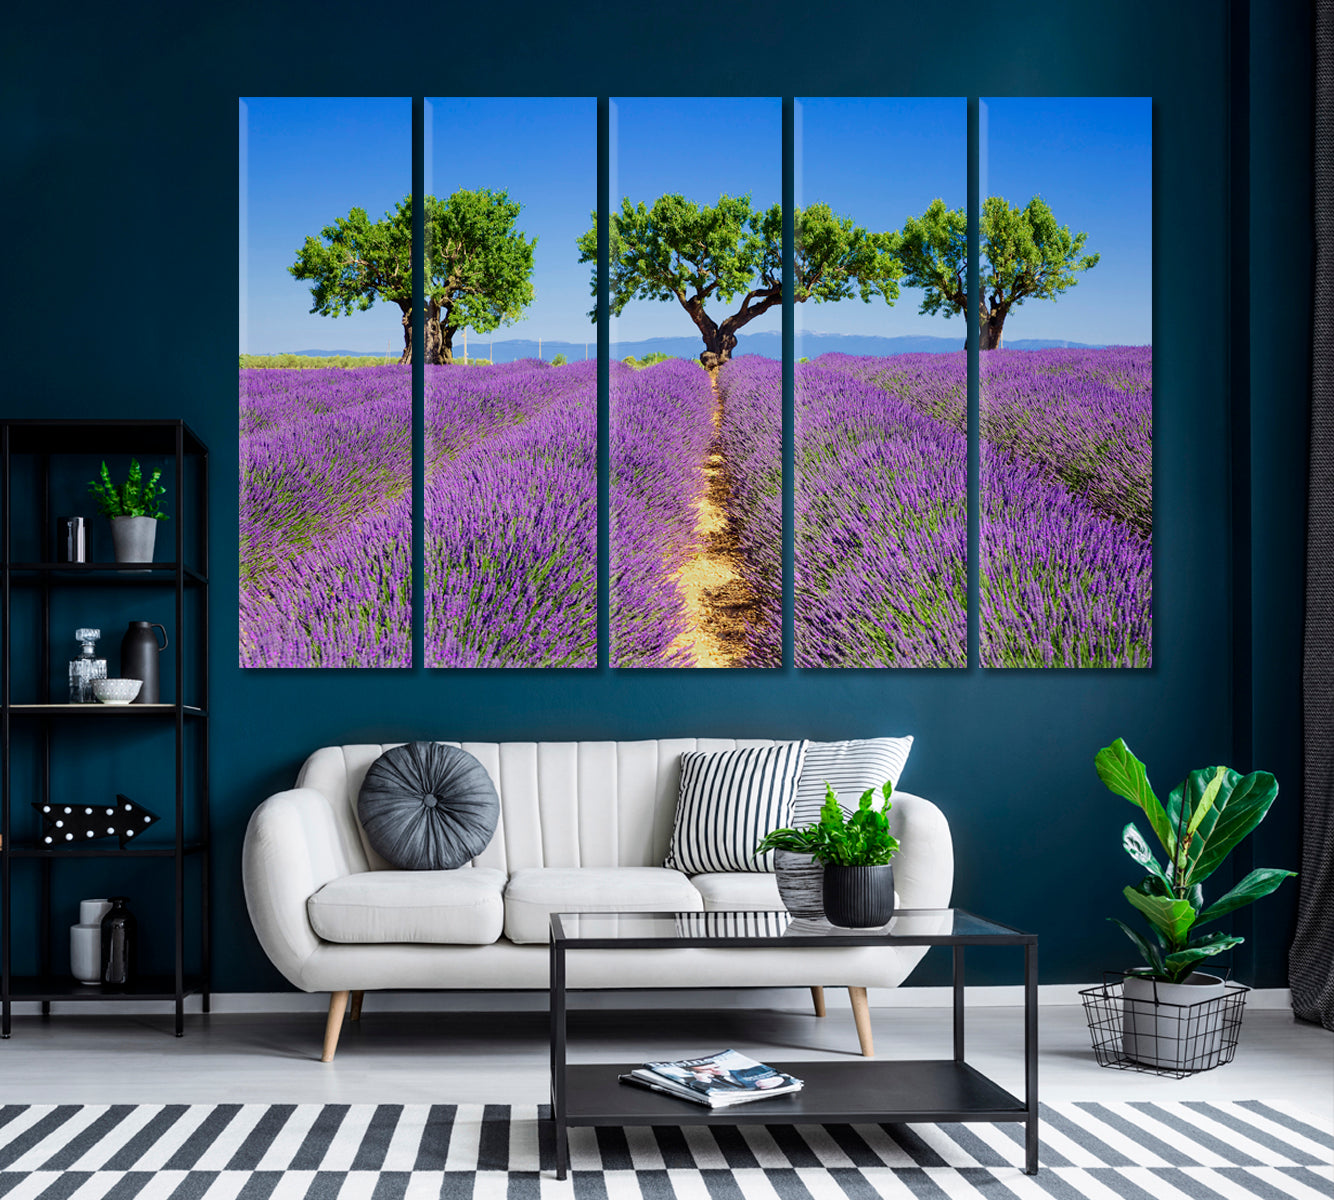 Lavender Fields of Provence France Canvas Print ArtLexy 5 Panels 36"x24" inches 